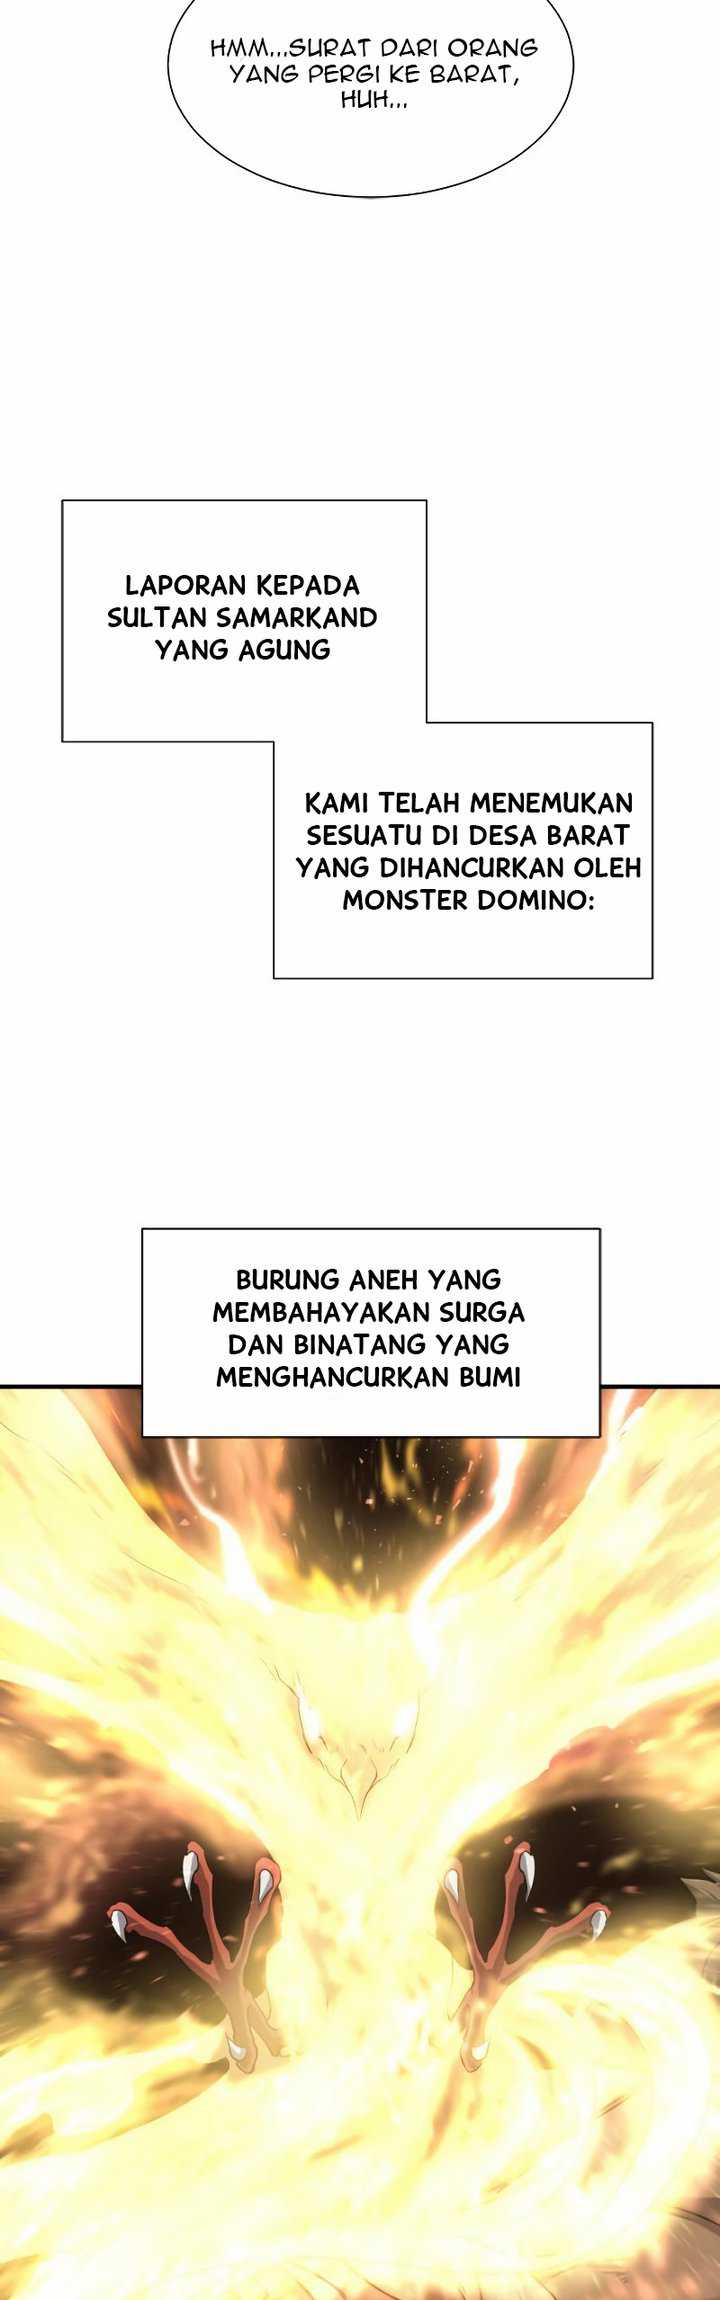 The World’s Best Engineer Chapter 71 bahasa indonesia